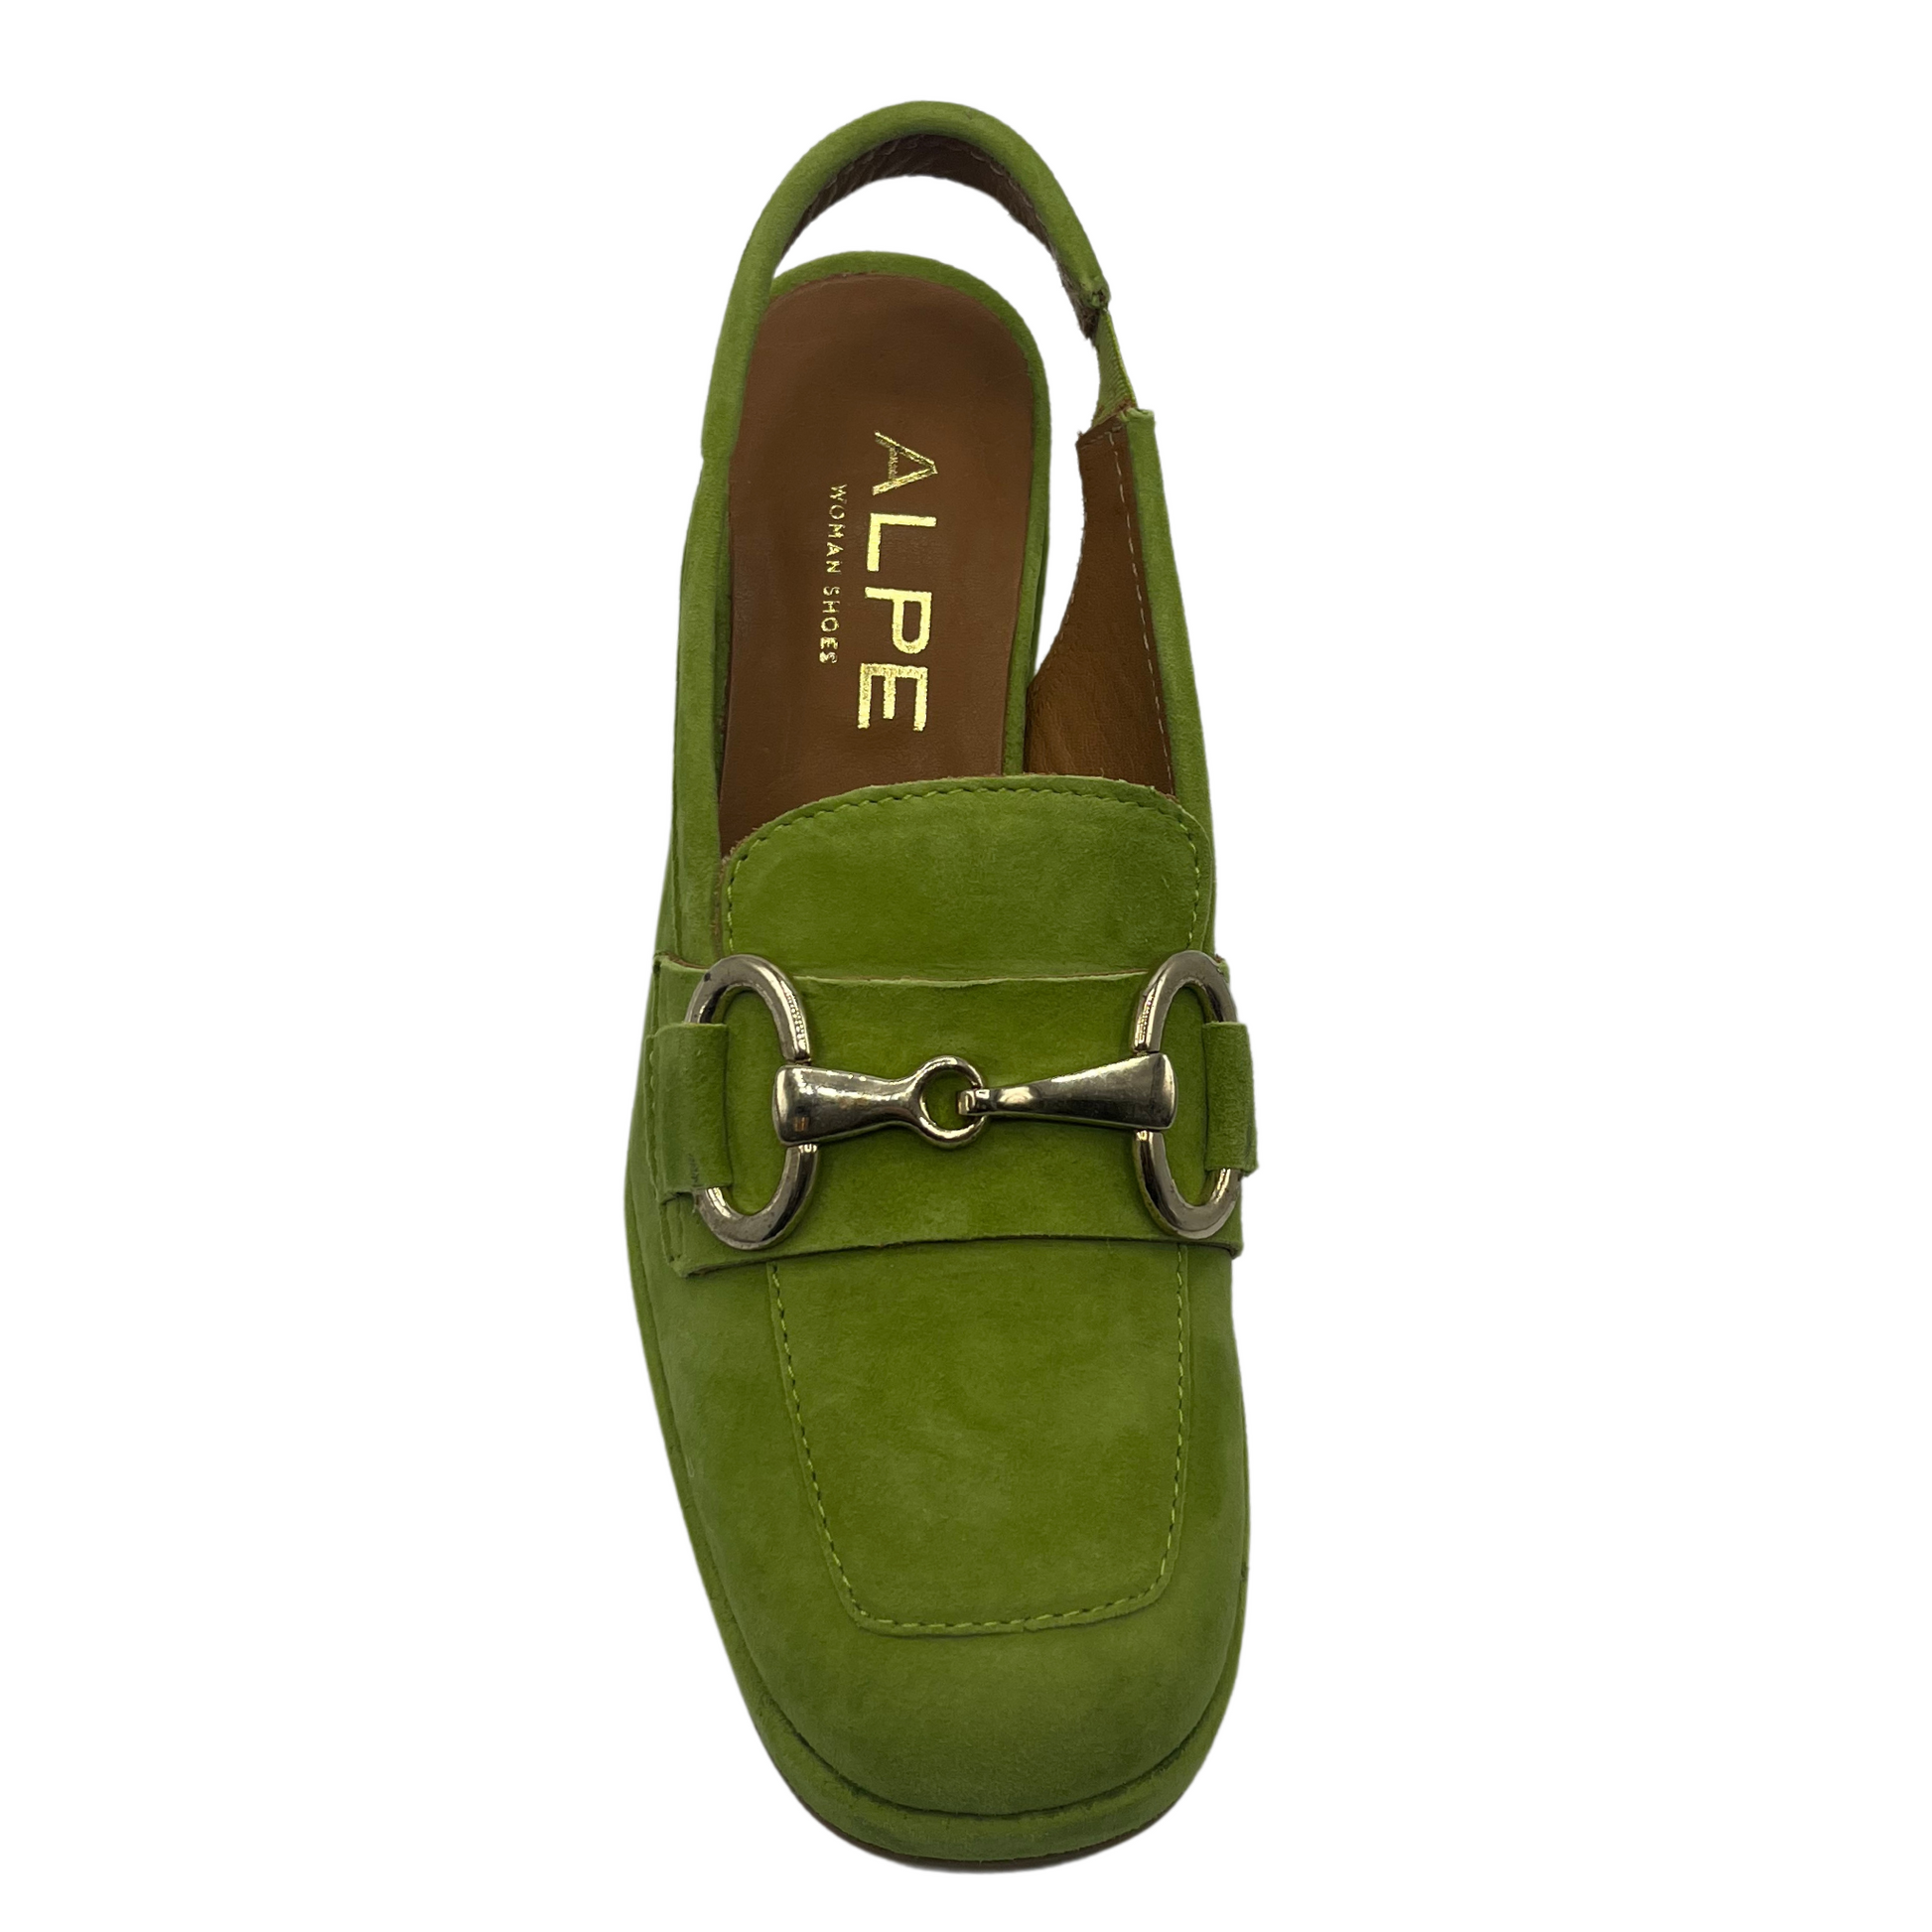 Top view of green suede sling back loafer with chunky heel and gold bit detail on upper